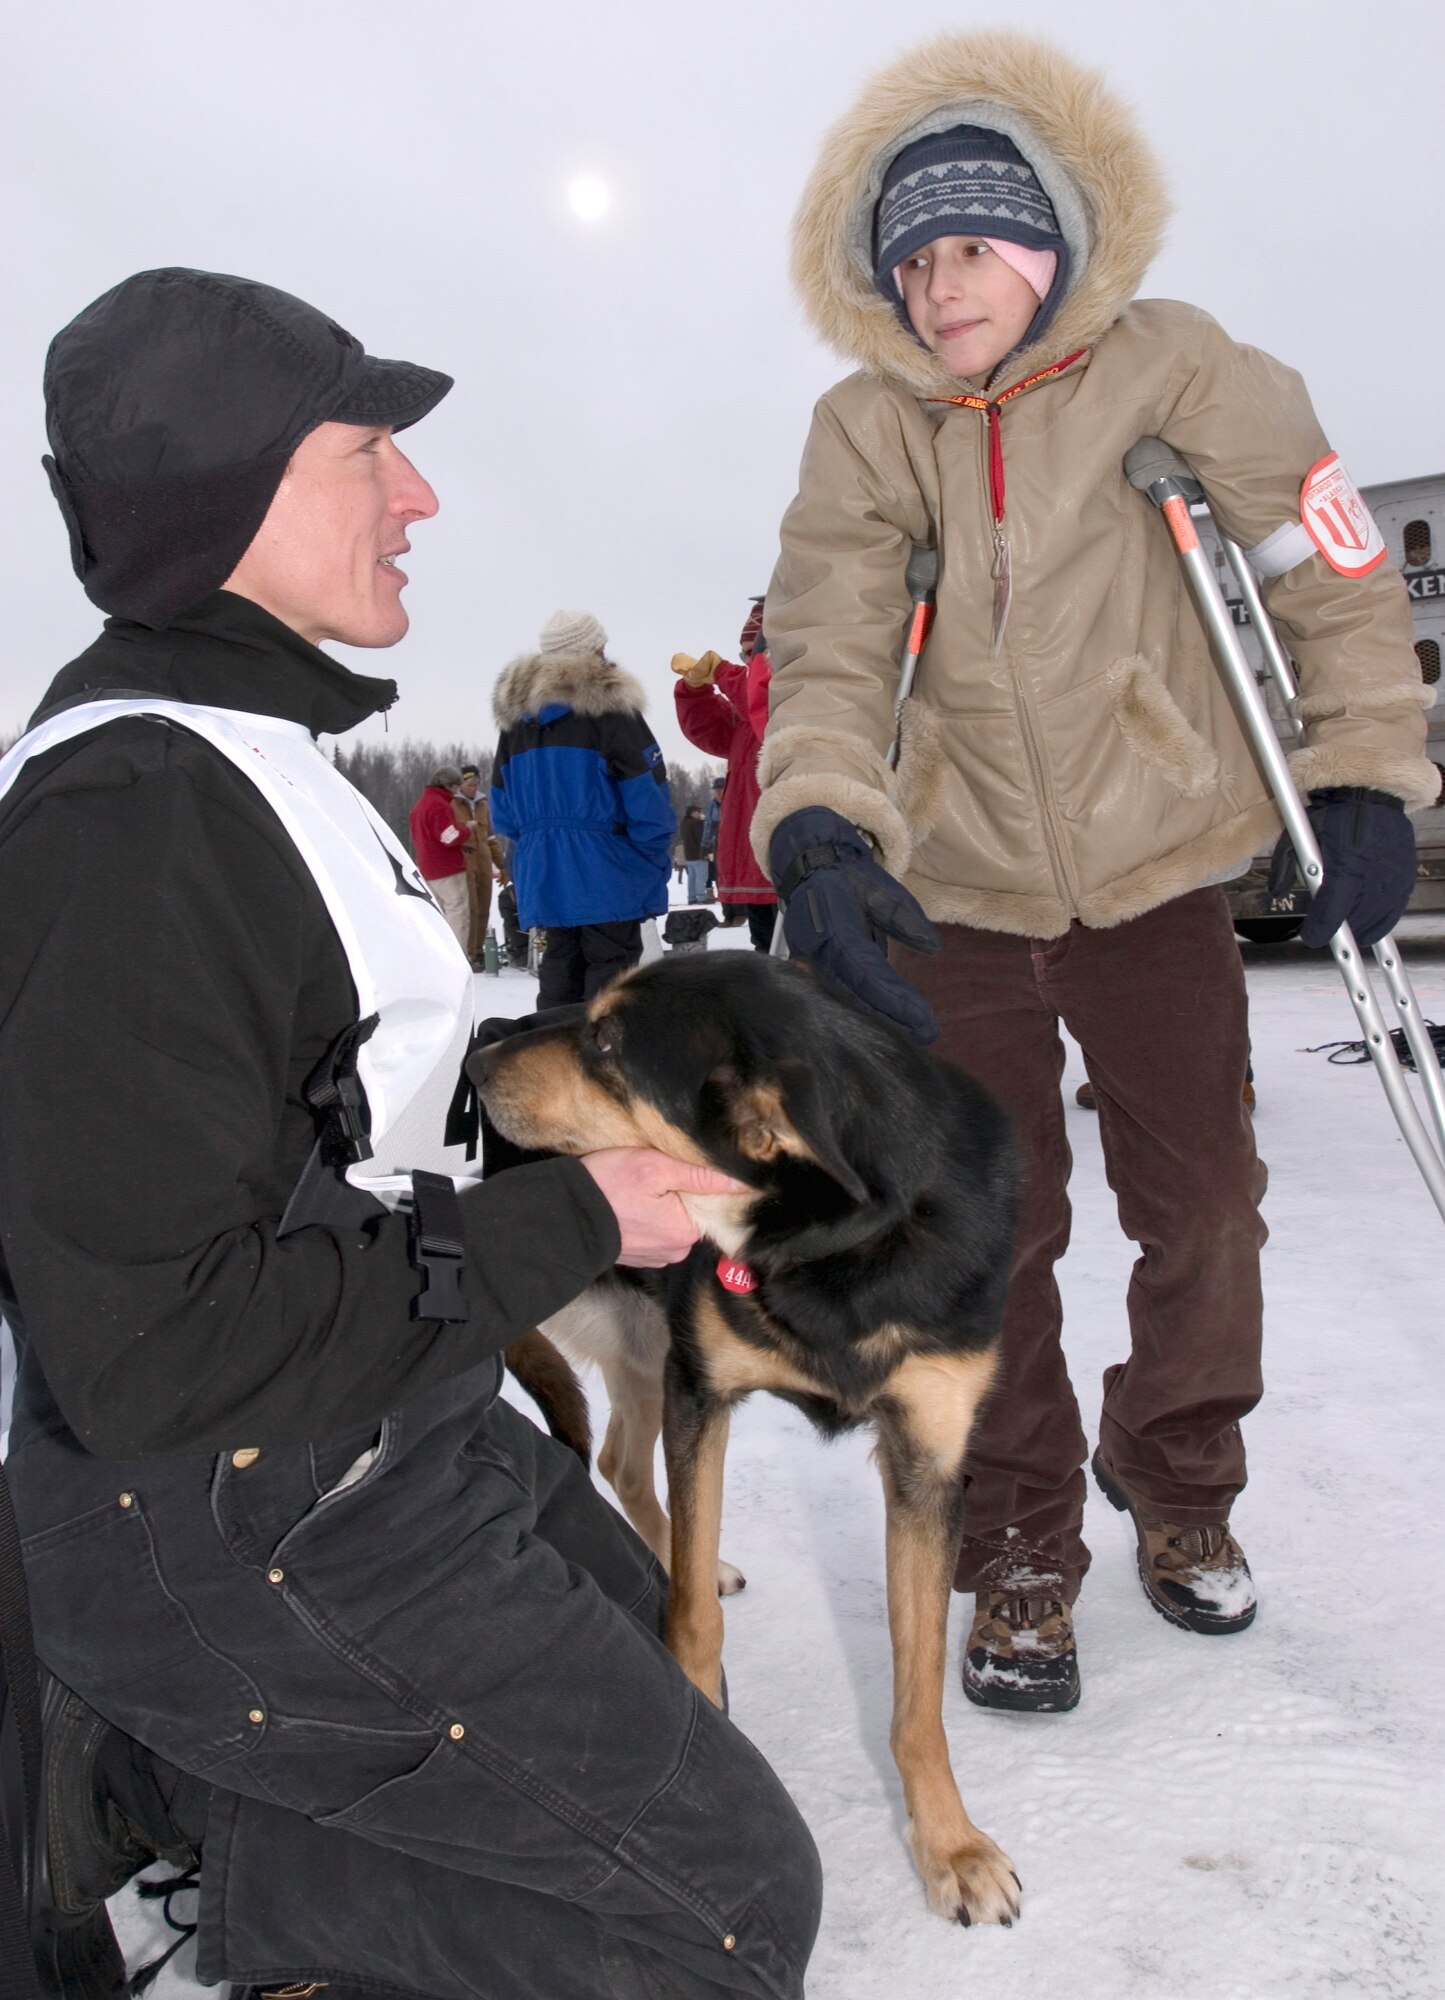 Maj. (Dr.) Thomas Knolmayer talks with 10-year-old Katie Powell before the start of the 2006 Iditarod Sled Dog Race. Katie is the daughter of Senior Master Sgt. Chris Powell of Travis Air Force Base, Calif., and is suffering from Ewing's Sarcoma, a rare bone cancer. (U.S. Air Force photo/Tech. Sgt. Keith Brown)